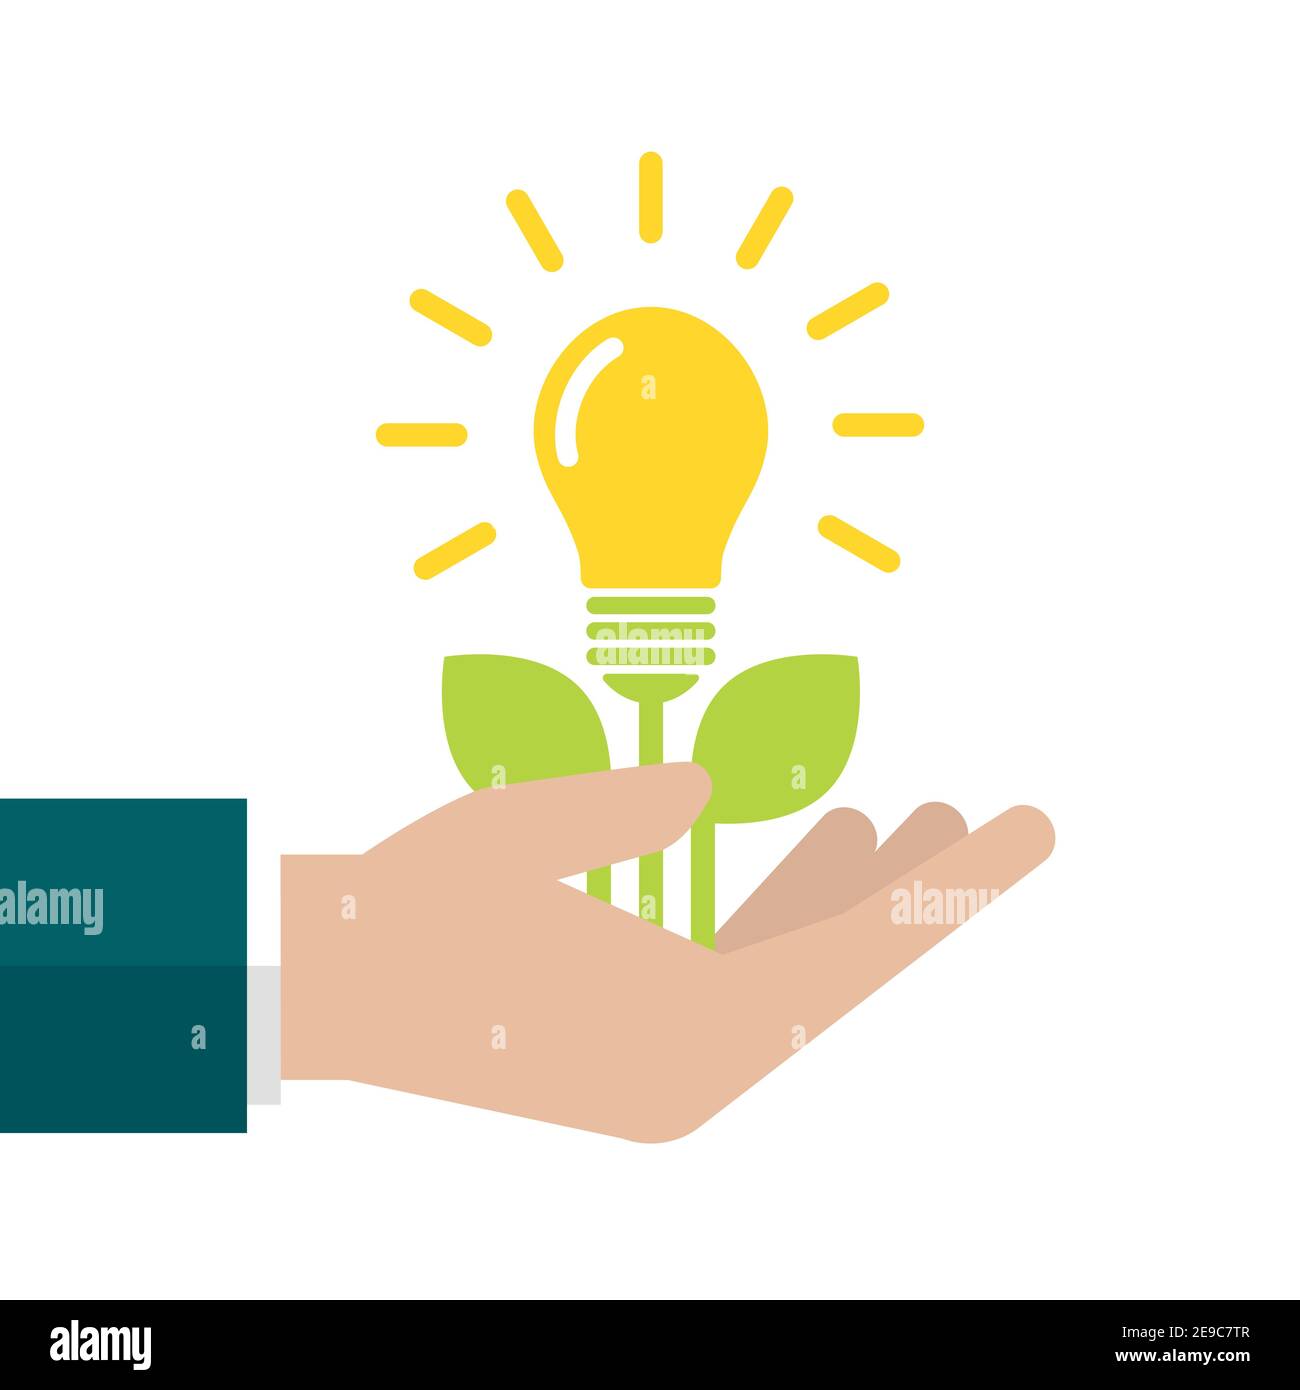 Plant in with green leaves and yellow shining bulb in hand. Vector flat illustration on blue. Give, receive, take, earn money. Financial success, sala Stock Vector